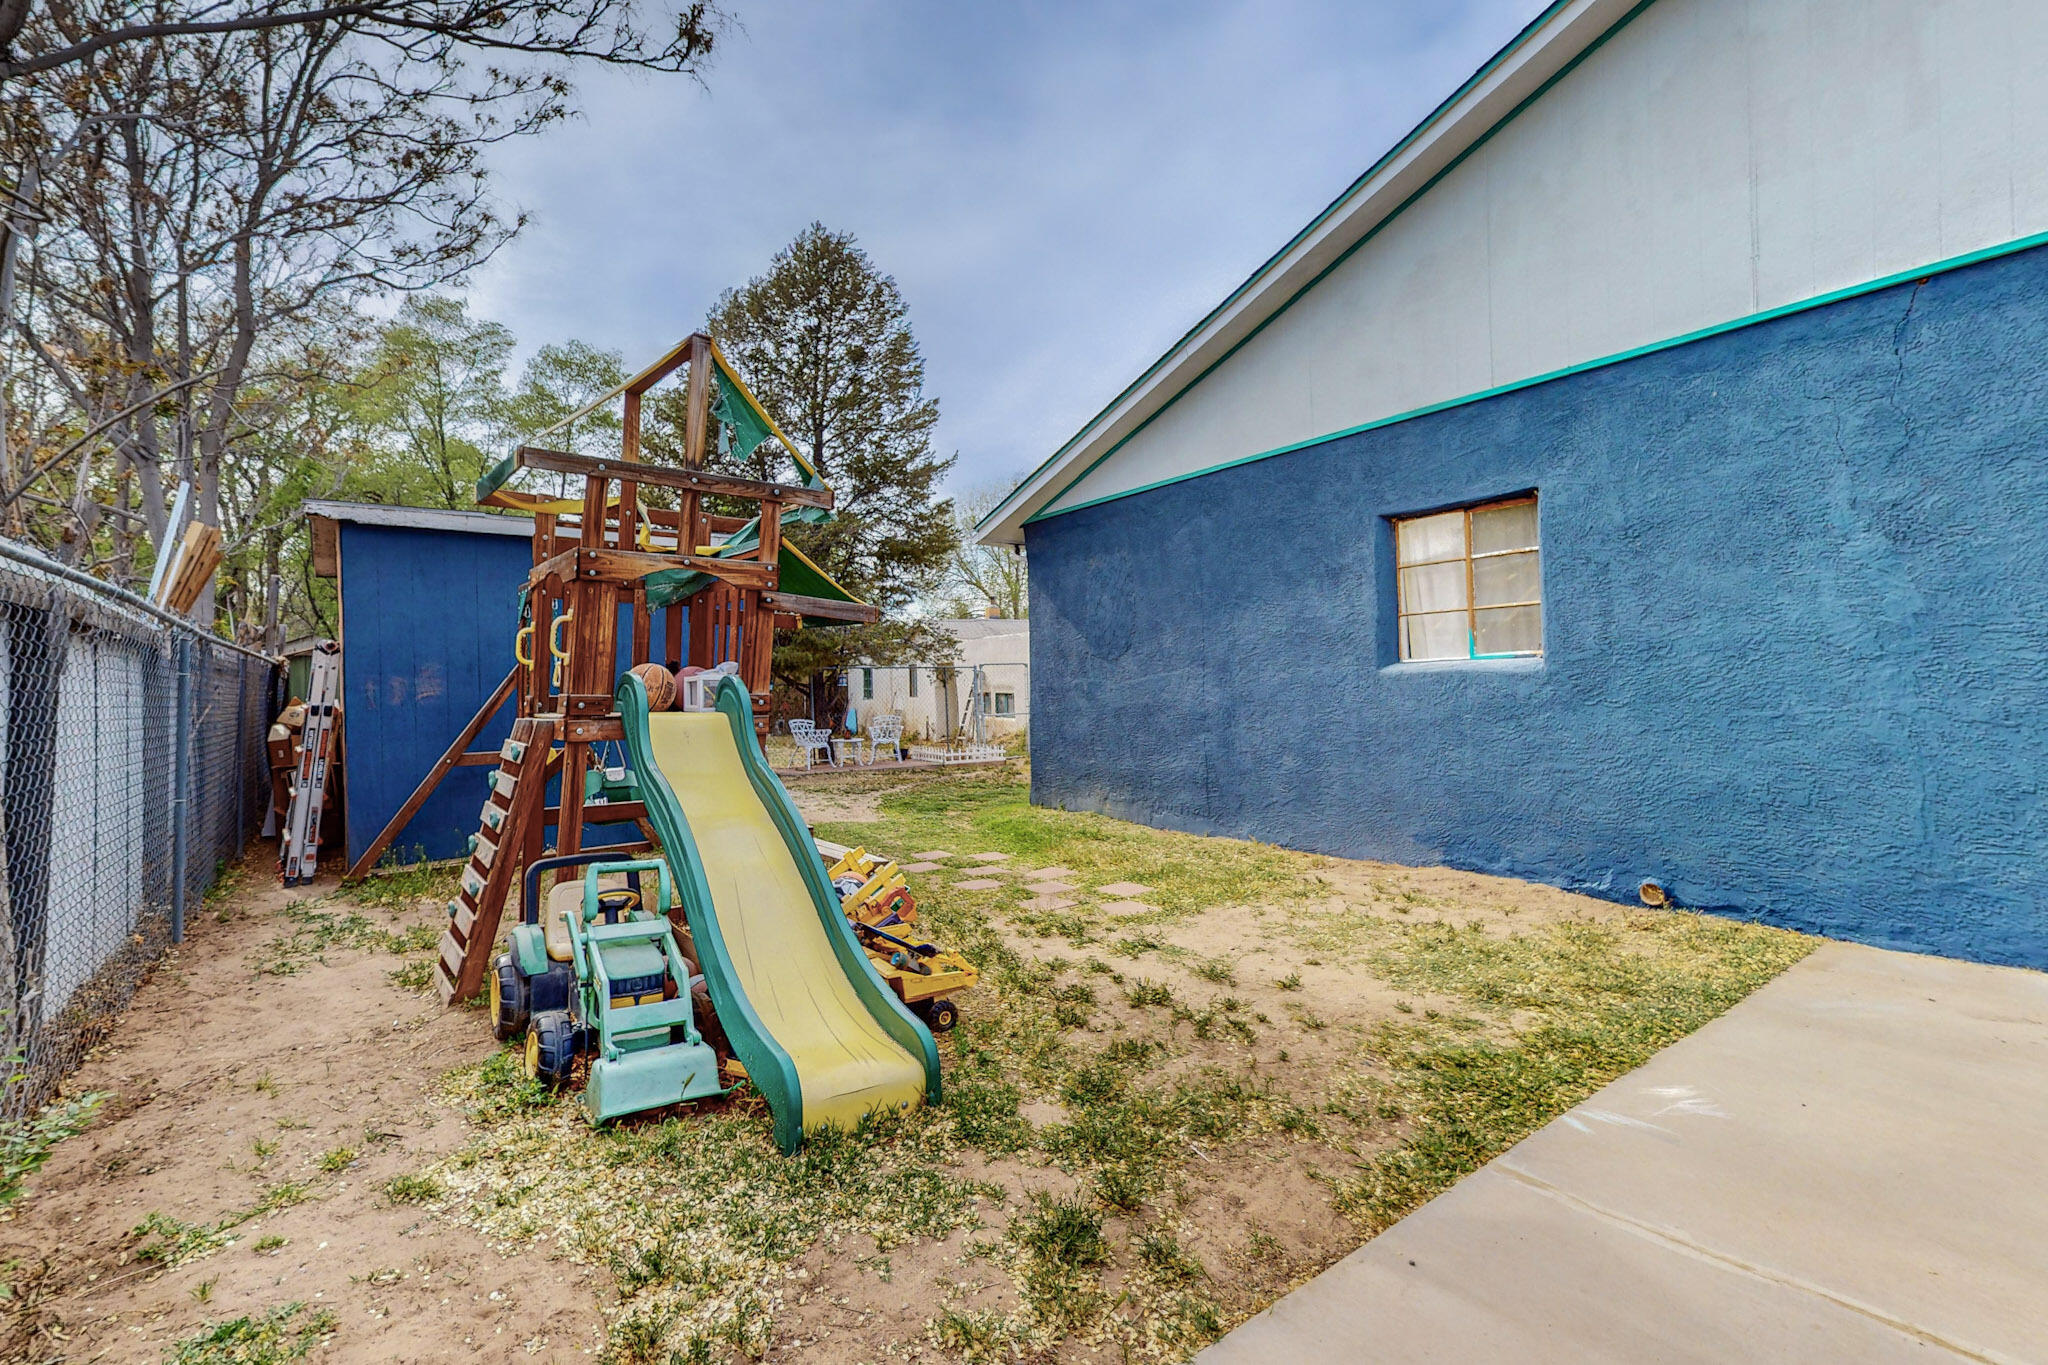 847 Arthur Drive SW, Albuquerque, New Mexico 87105, 2 Bedrooms Bedrooms, ,1 BathroomBathrooms,Residential,For Sale,847 Arthur Drive SW,1060274